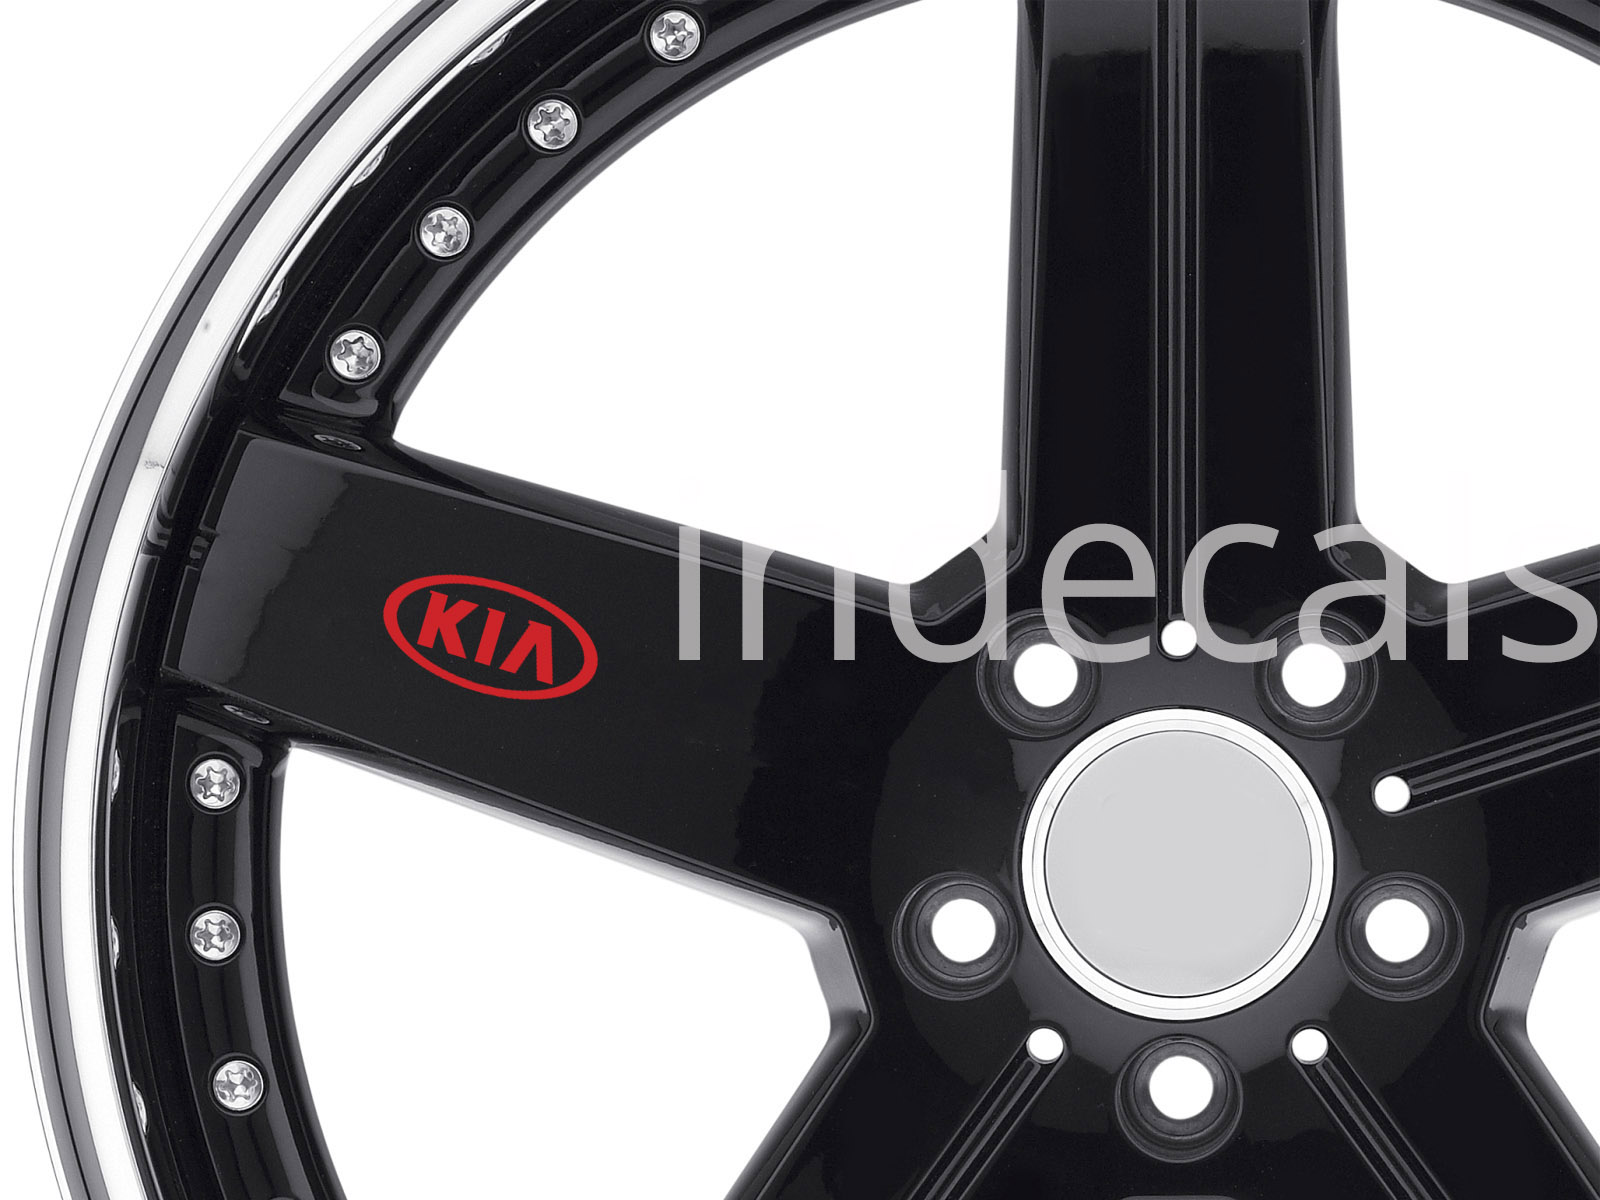 6 x KIA Stickers for Wheels - Red